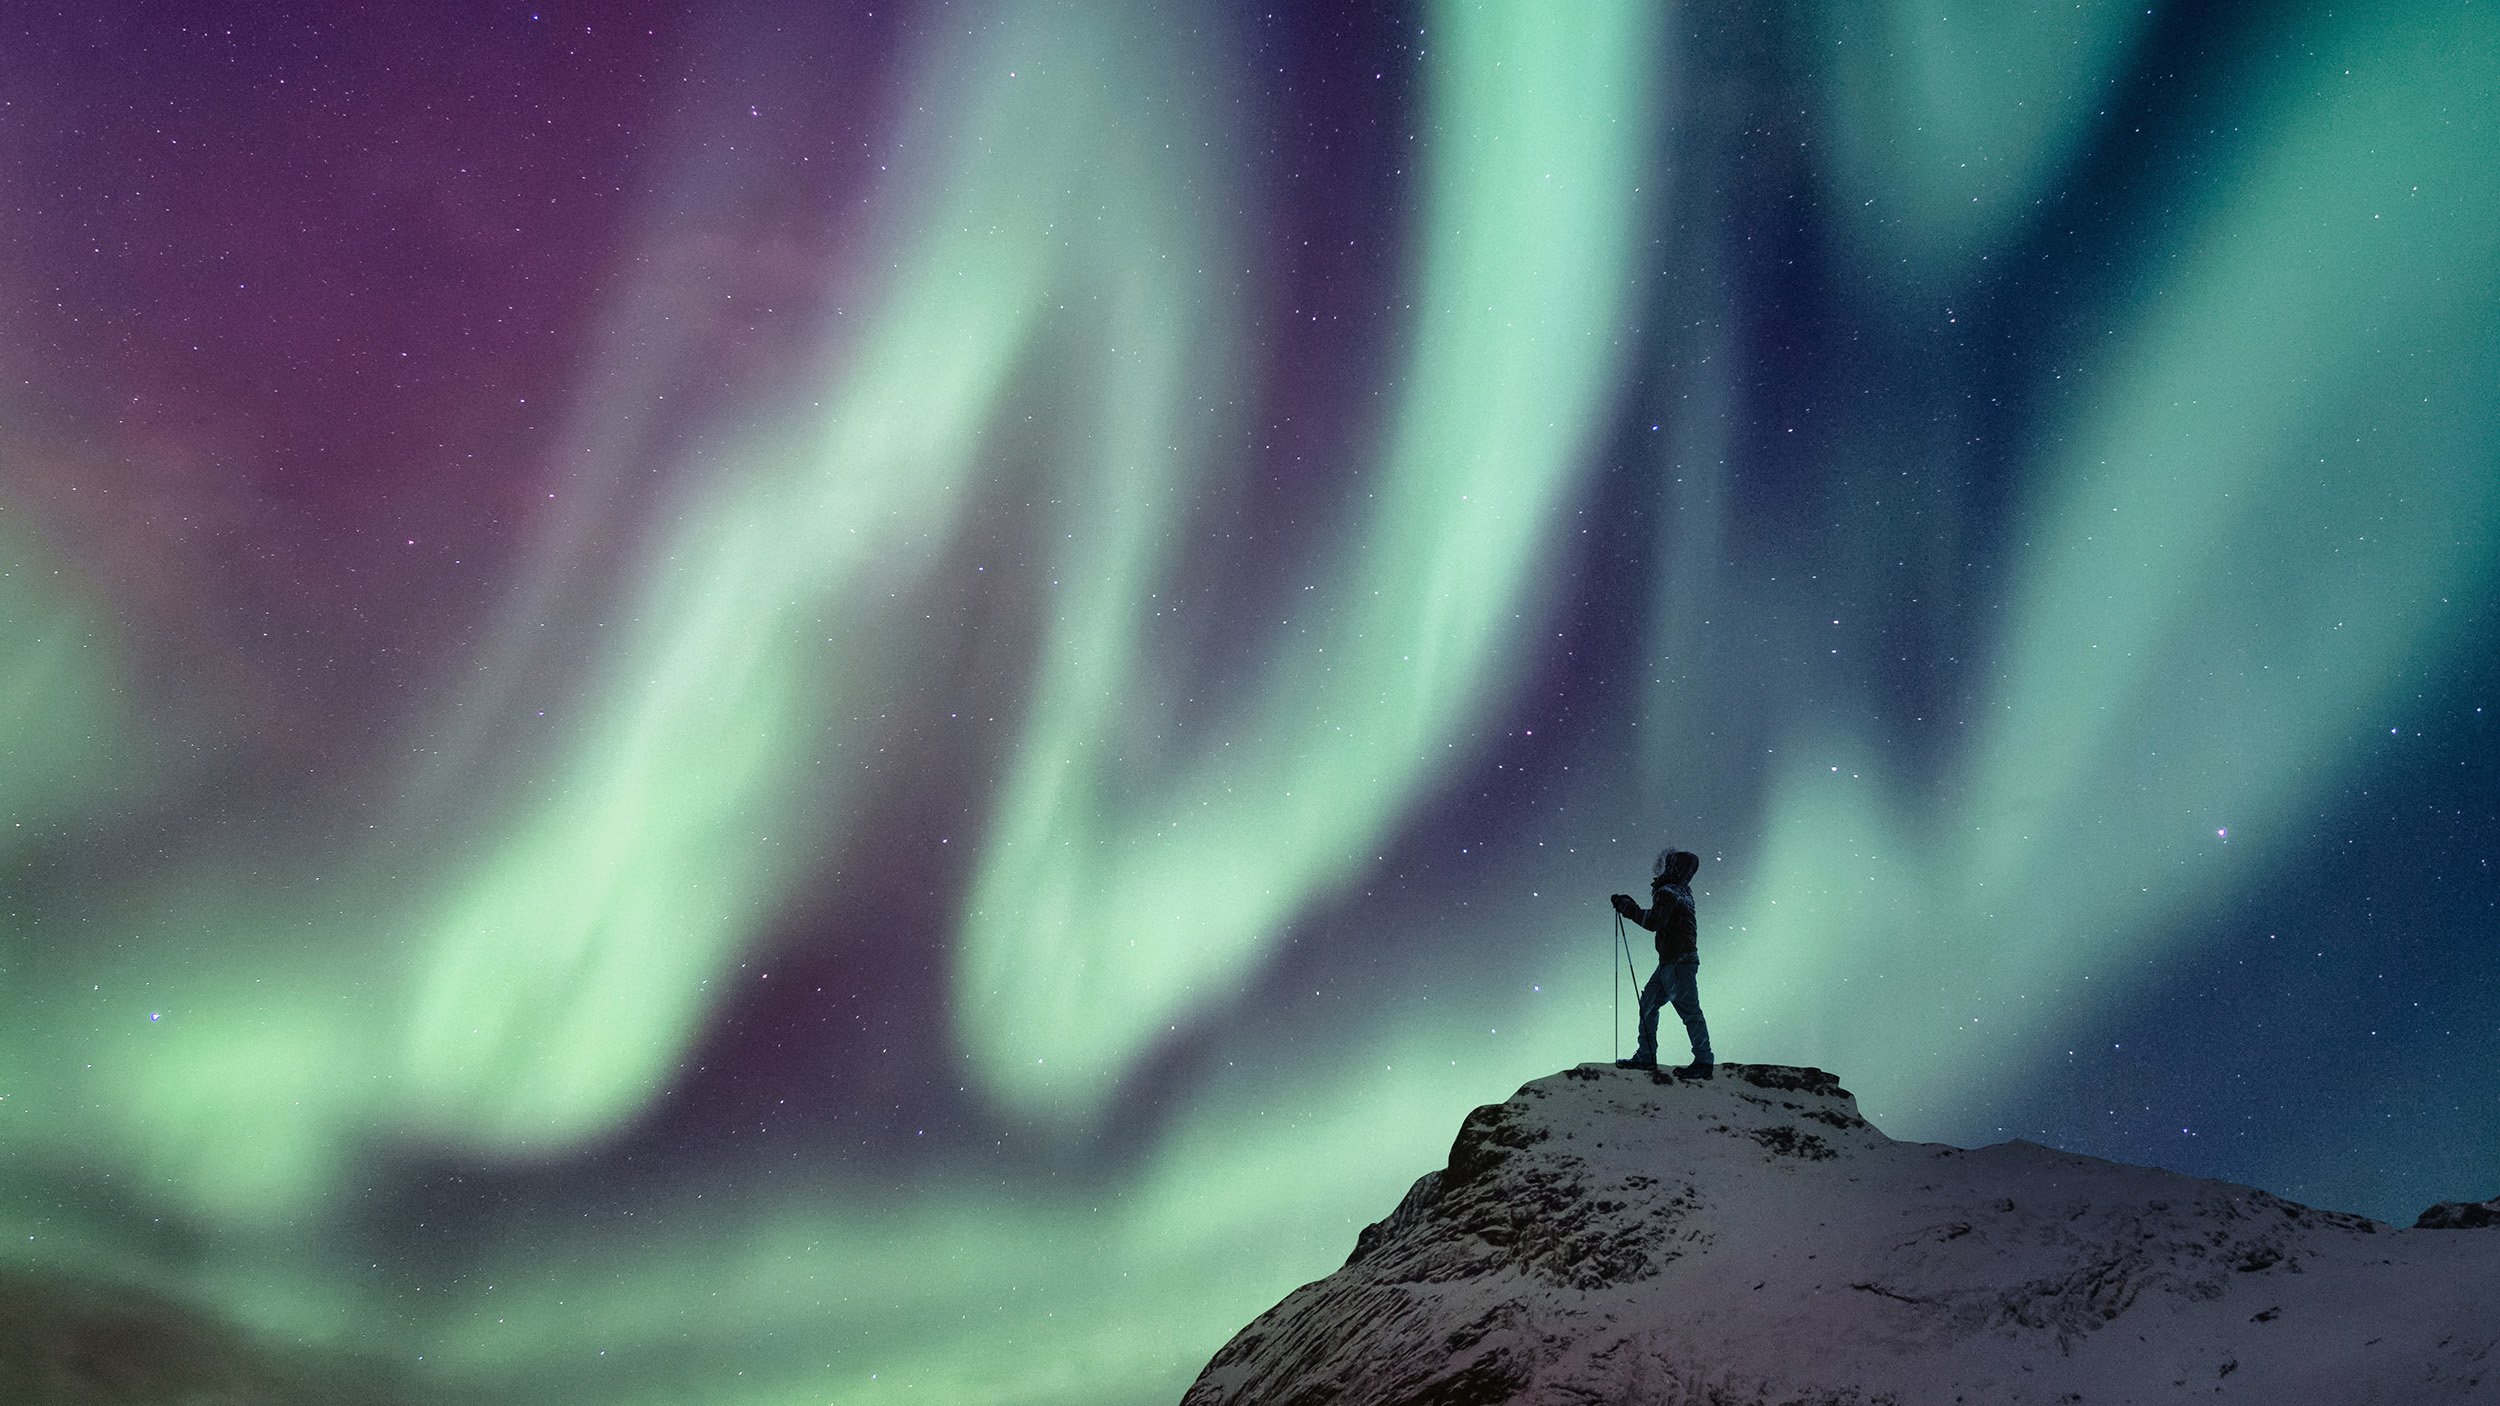 Send your aurora photos to NASA and help them study solar storms